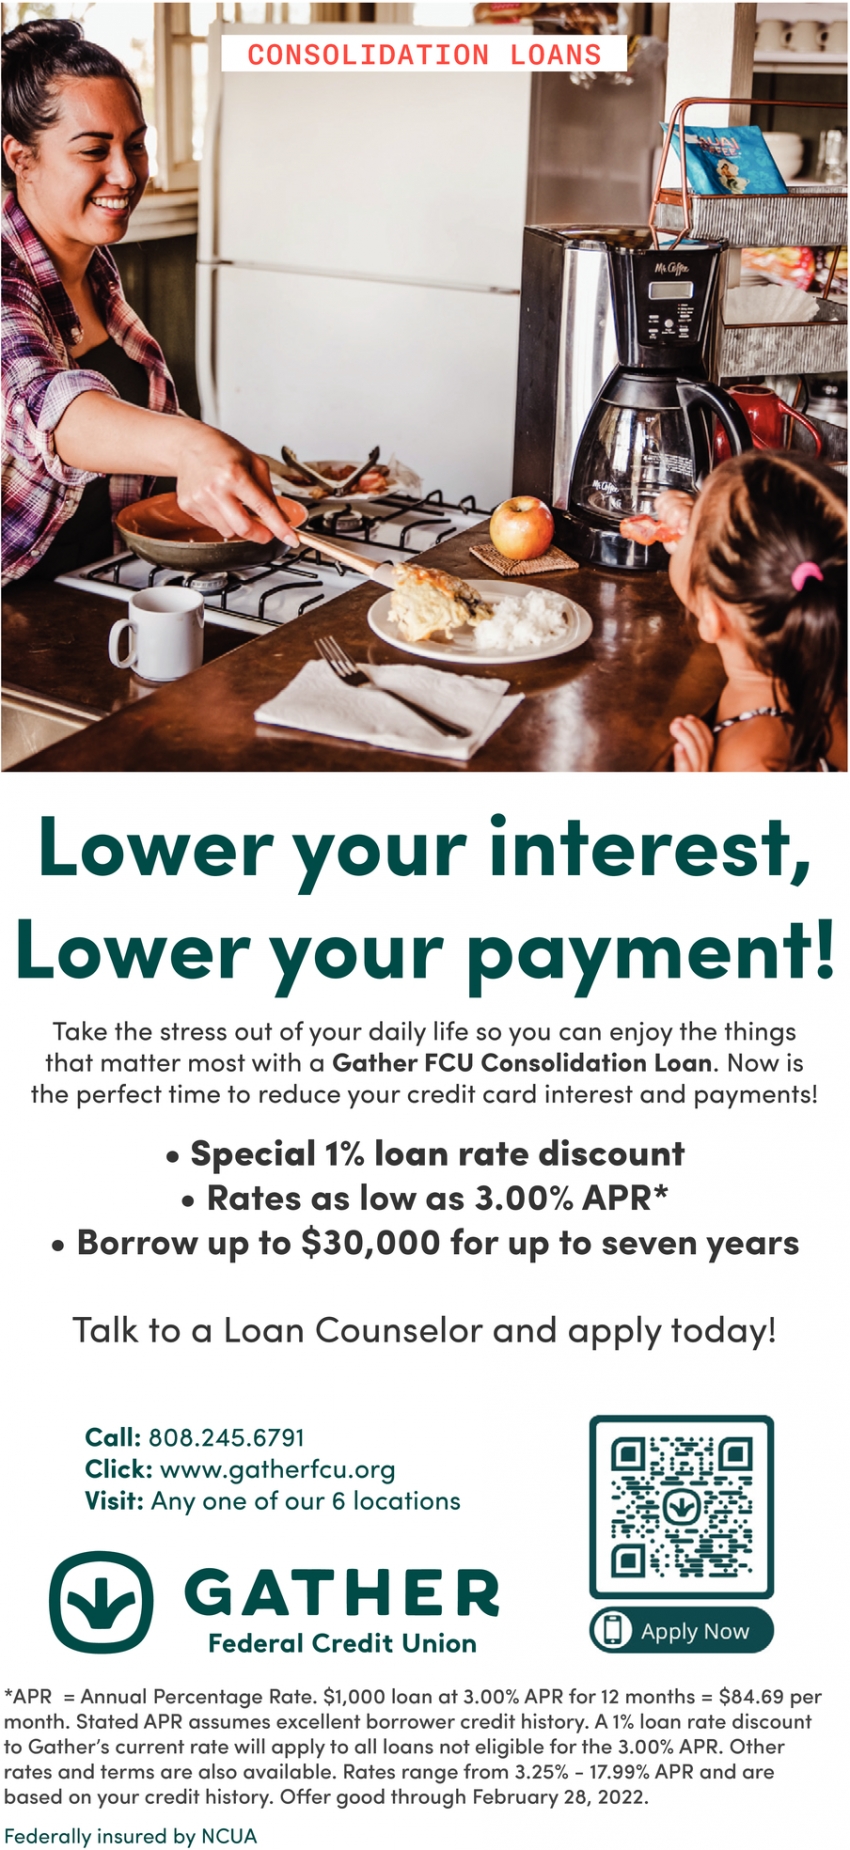 Lower Your Interest, Lower Your Payment!